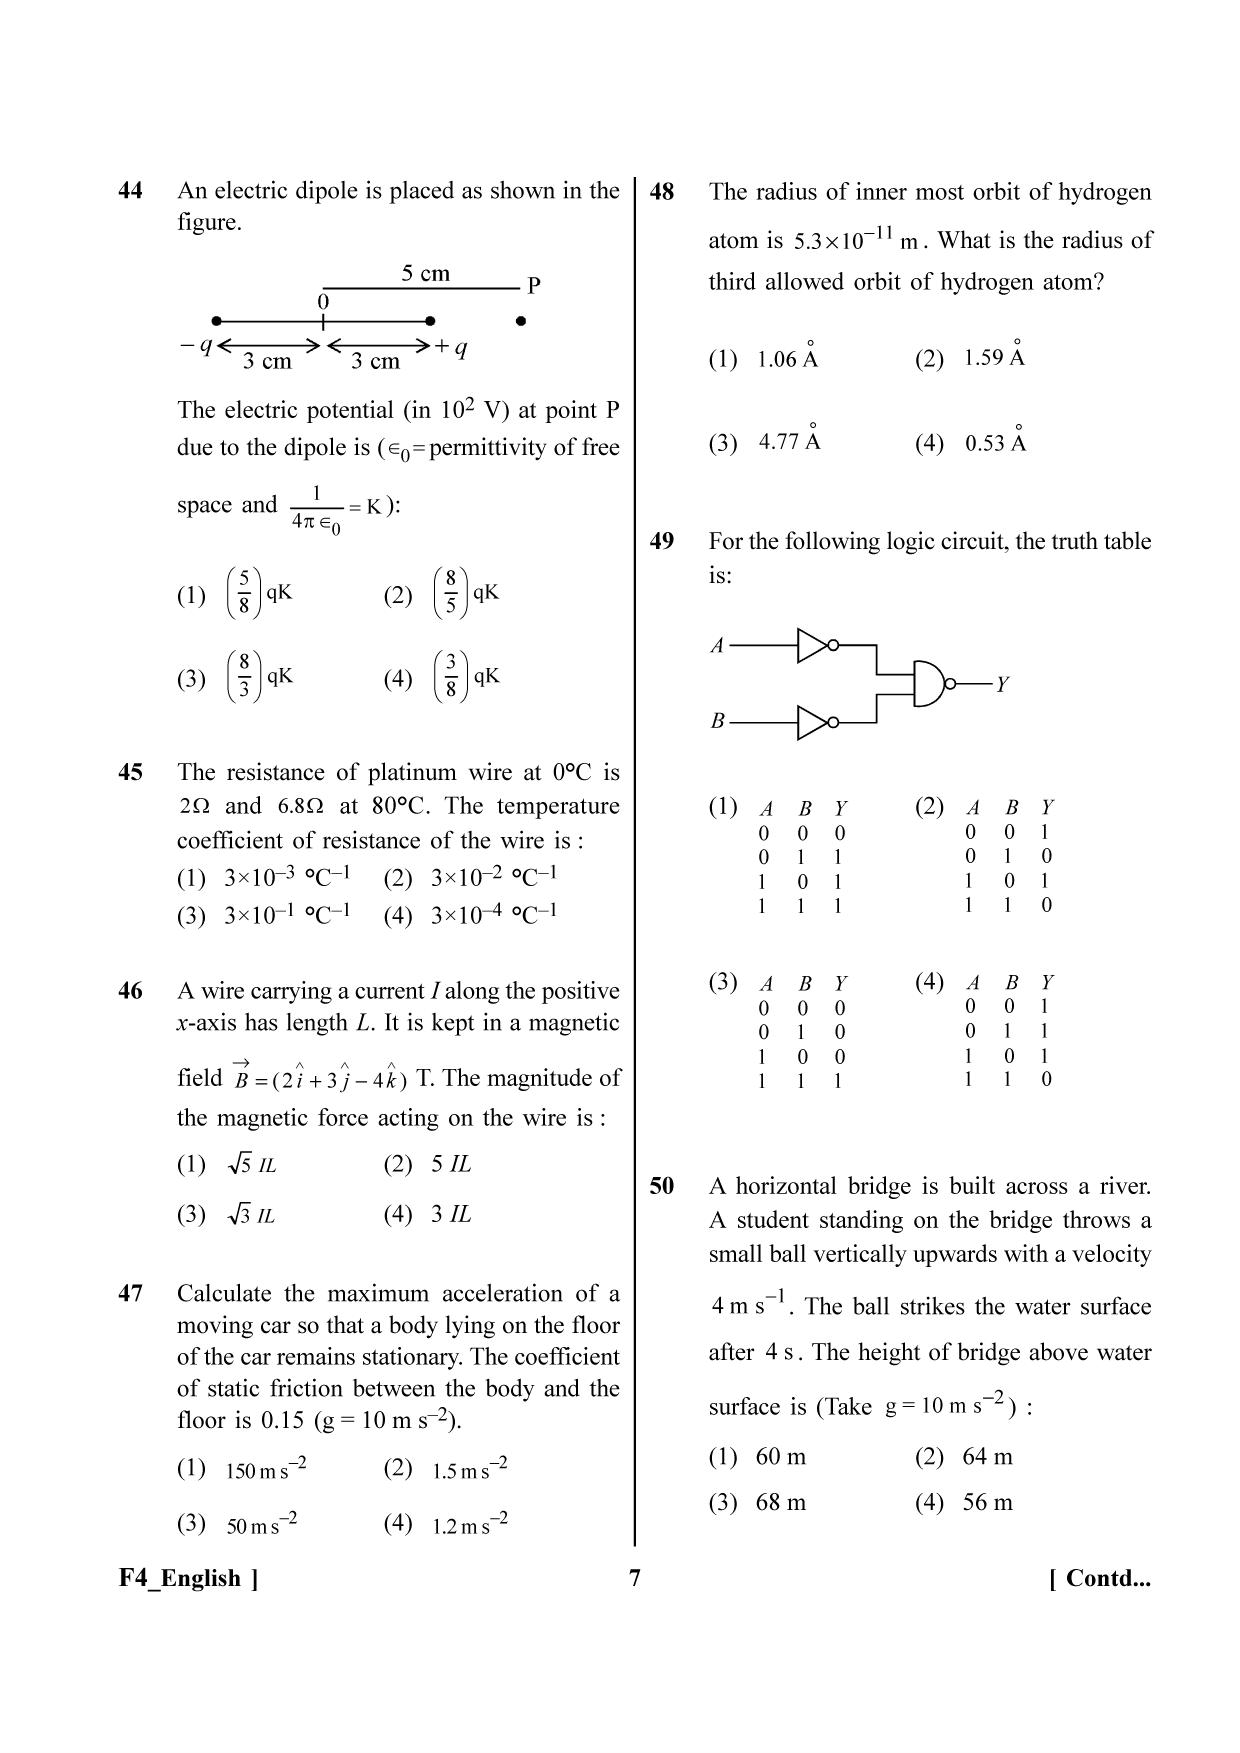 NEET 2023 F4 Question Paper - Page 7